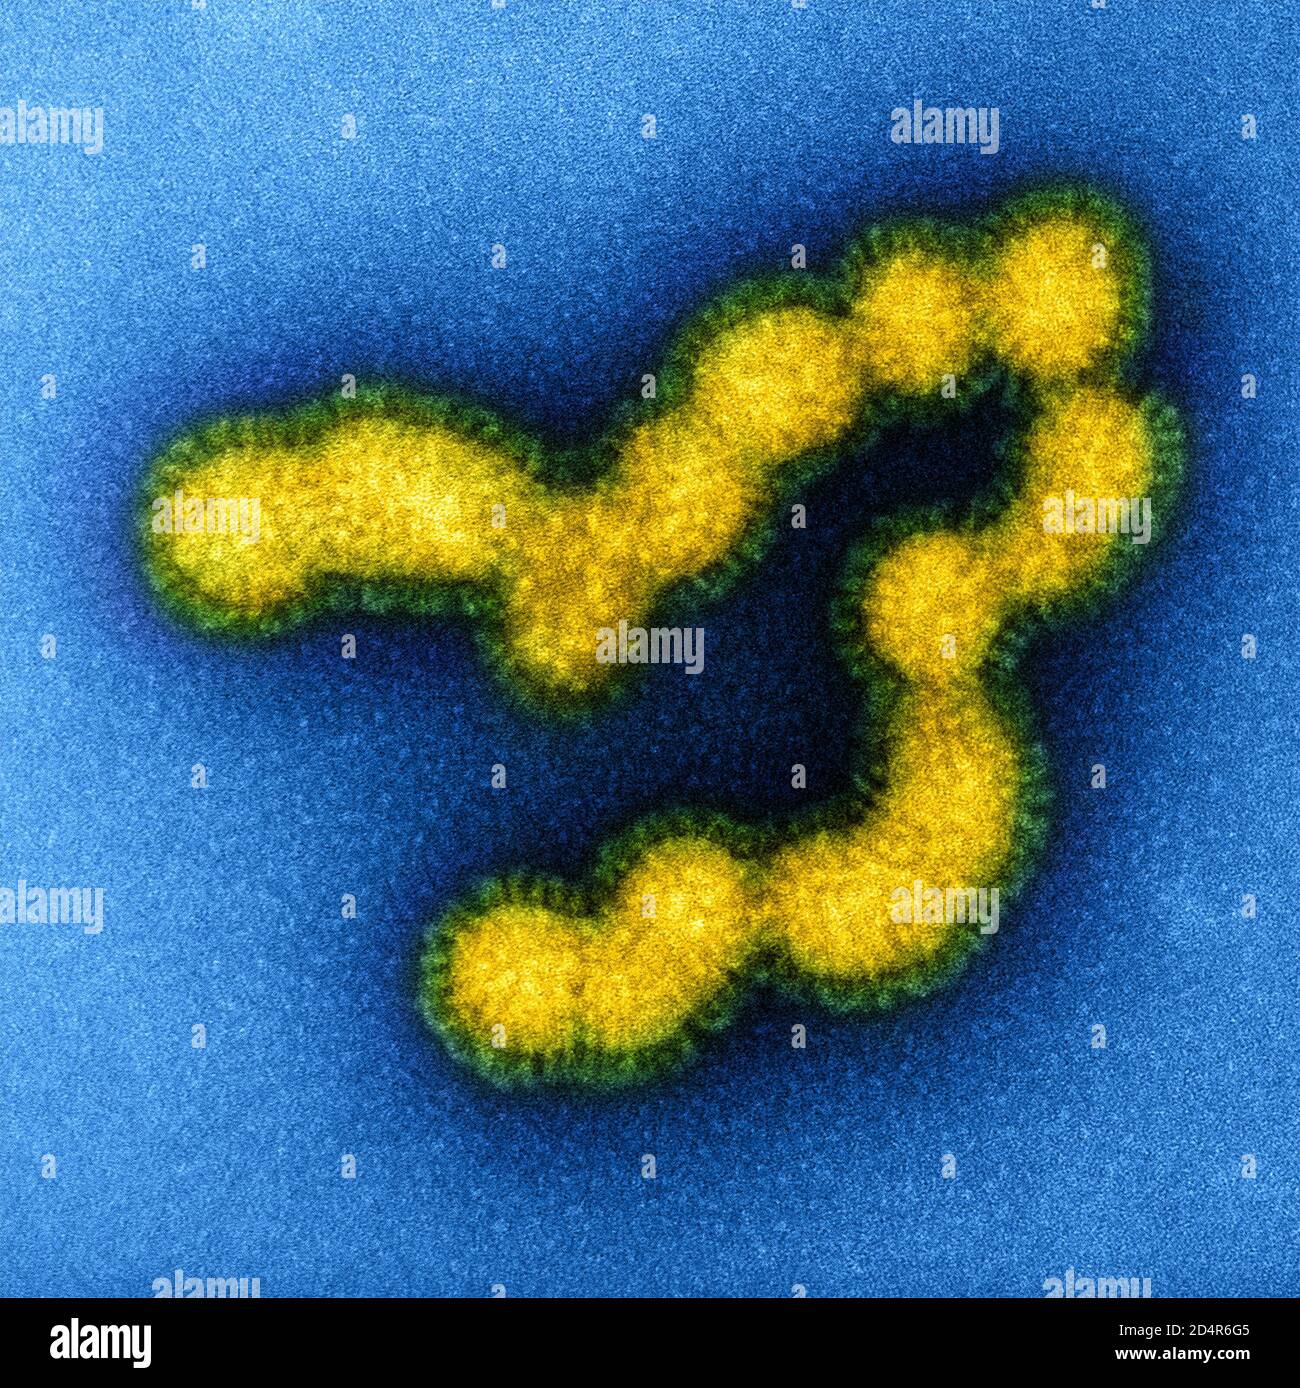 Swine Flu Strain Virus Particles Colorized transmission electron micrograph of negatively stained SW31 (swine strain) influenza virus particles. Credi Stock Photo